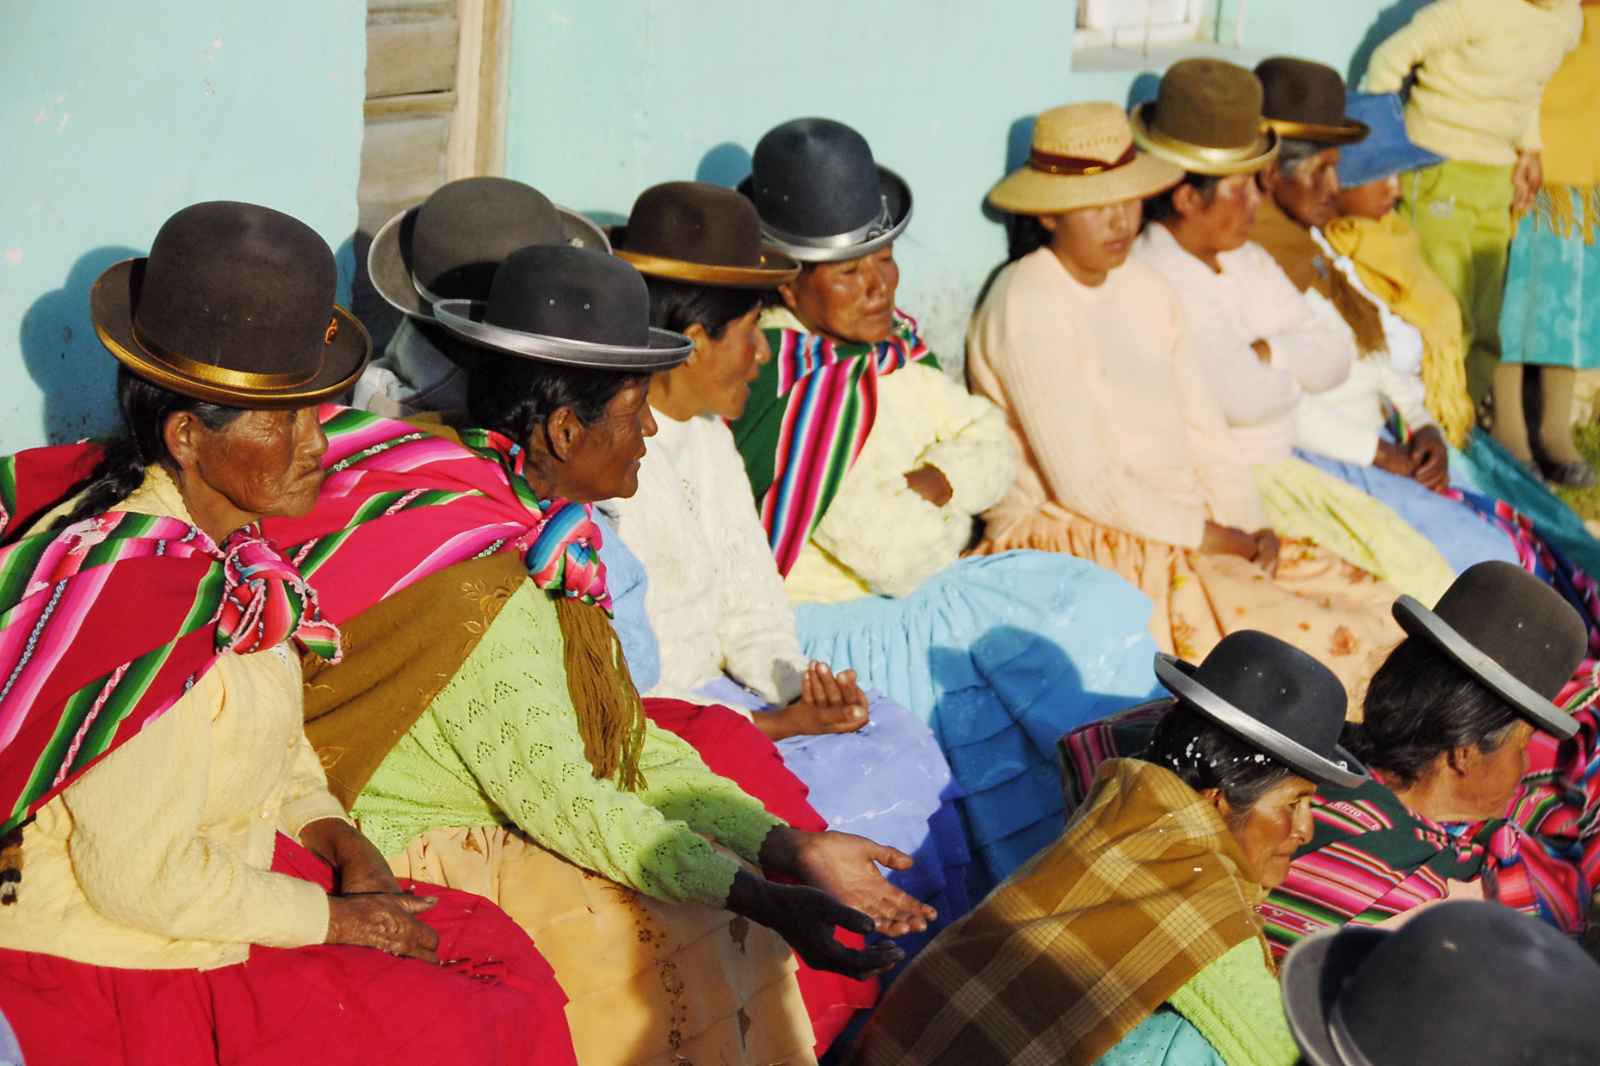 Facts About Bolivia Bolivia's Linguistic Diversity